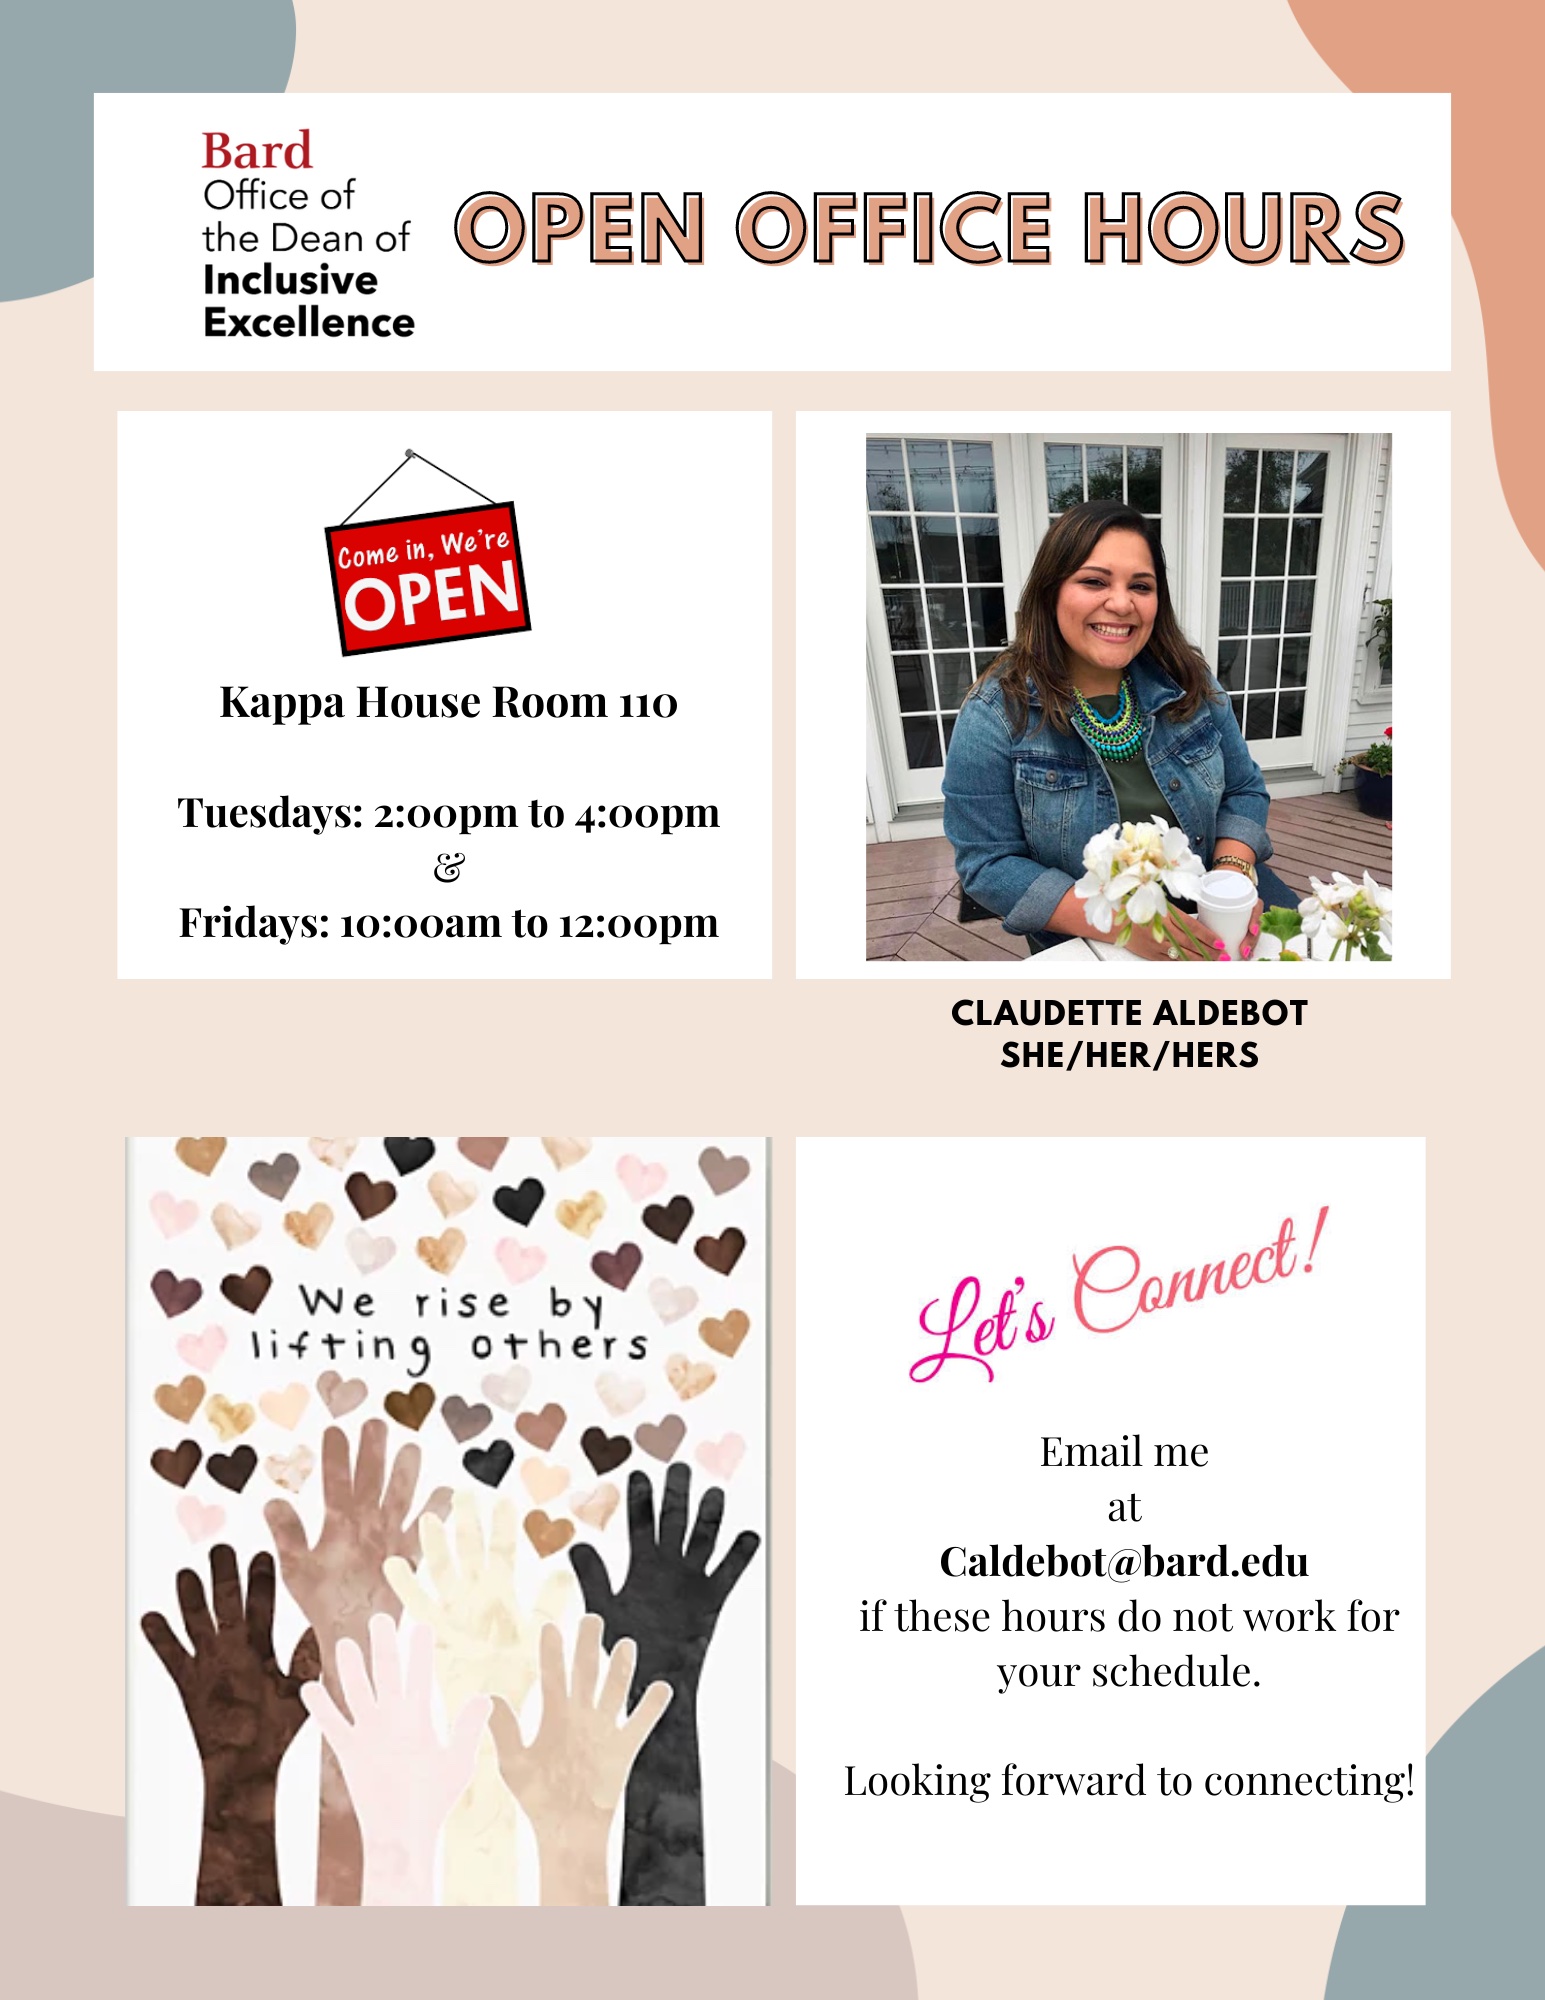 Open Office Hours: Office of the Dean of Inclusive Excellence